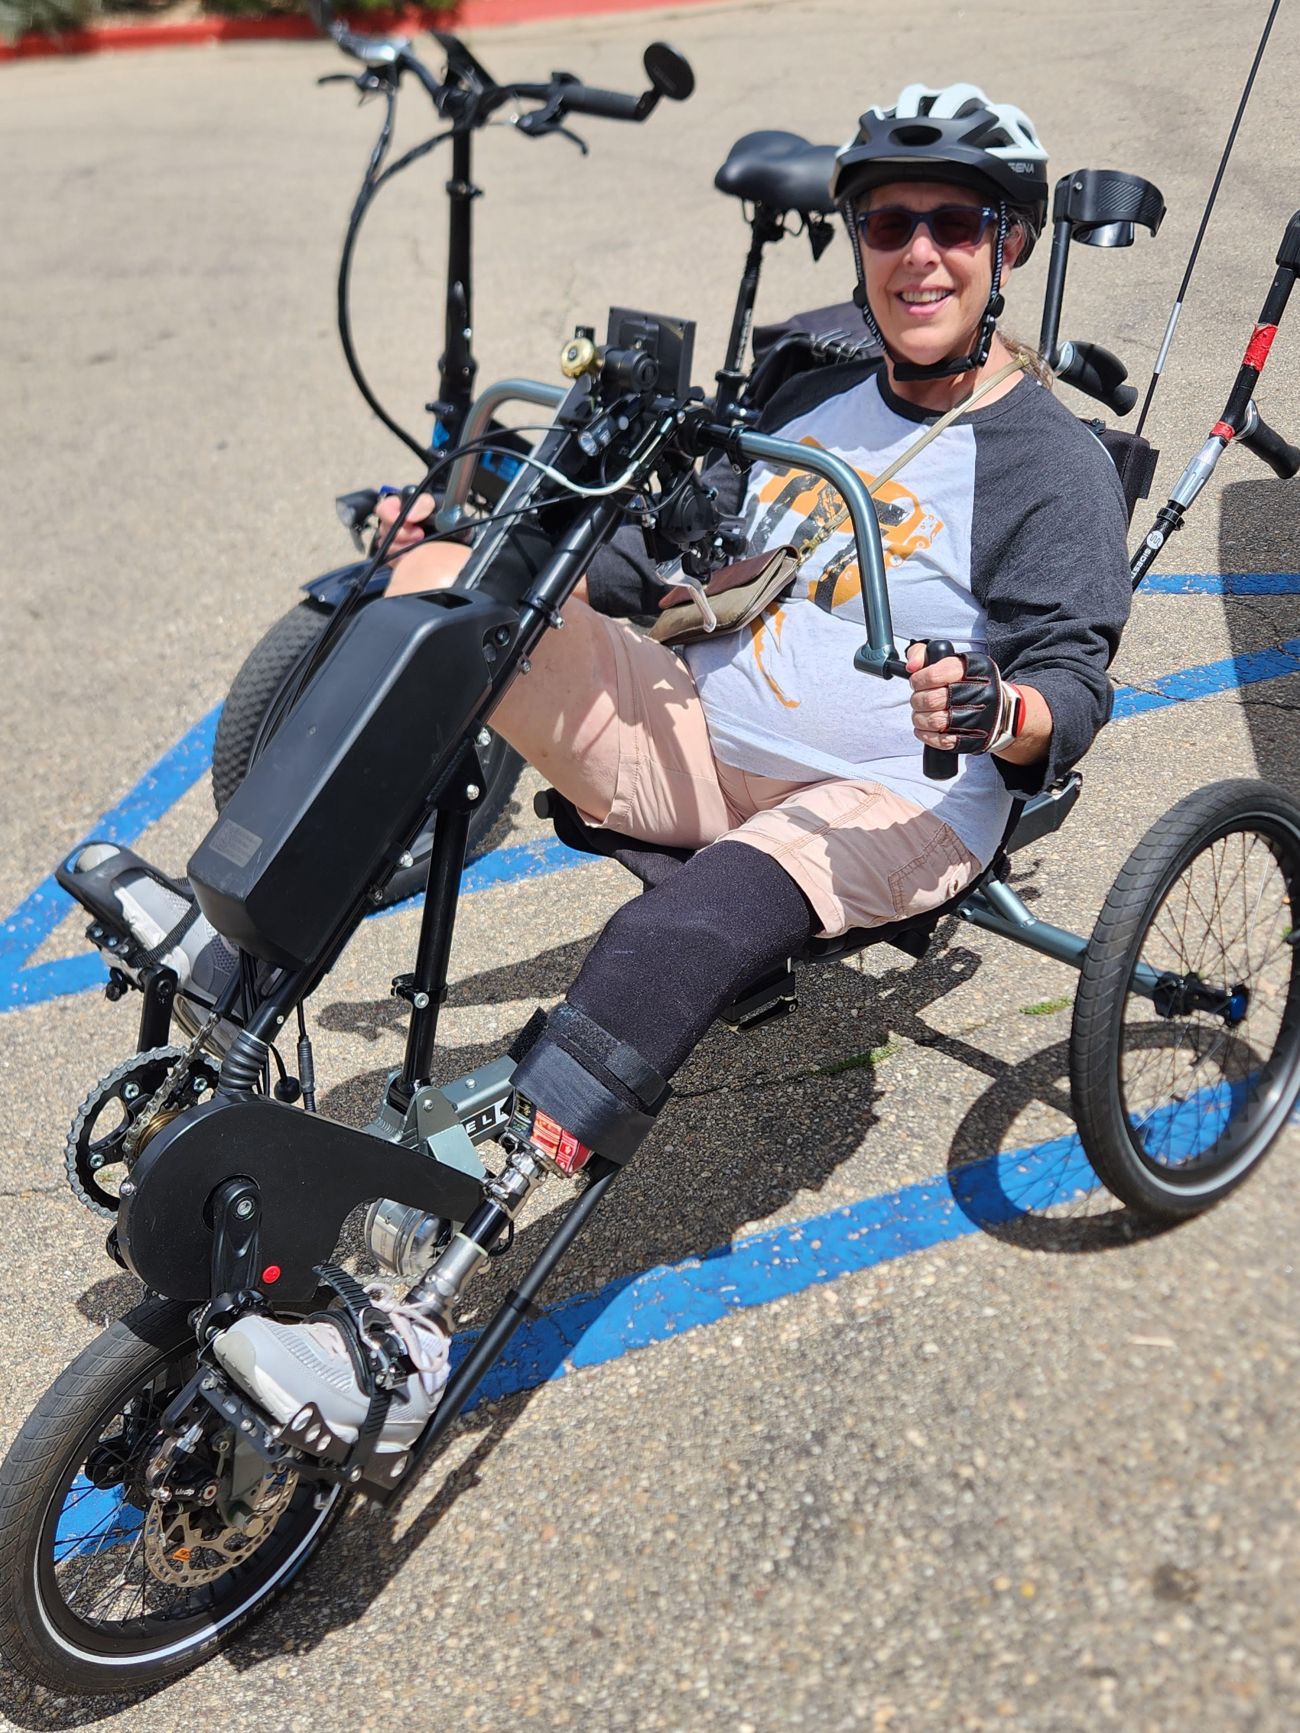 Beth Hudson in a modified tricycle, which is low to the ground